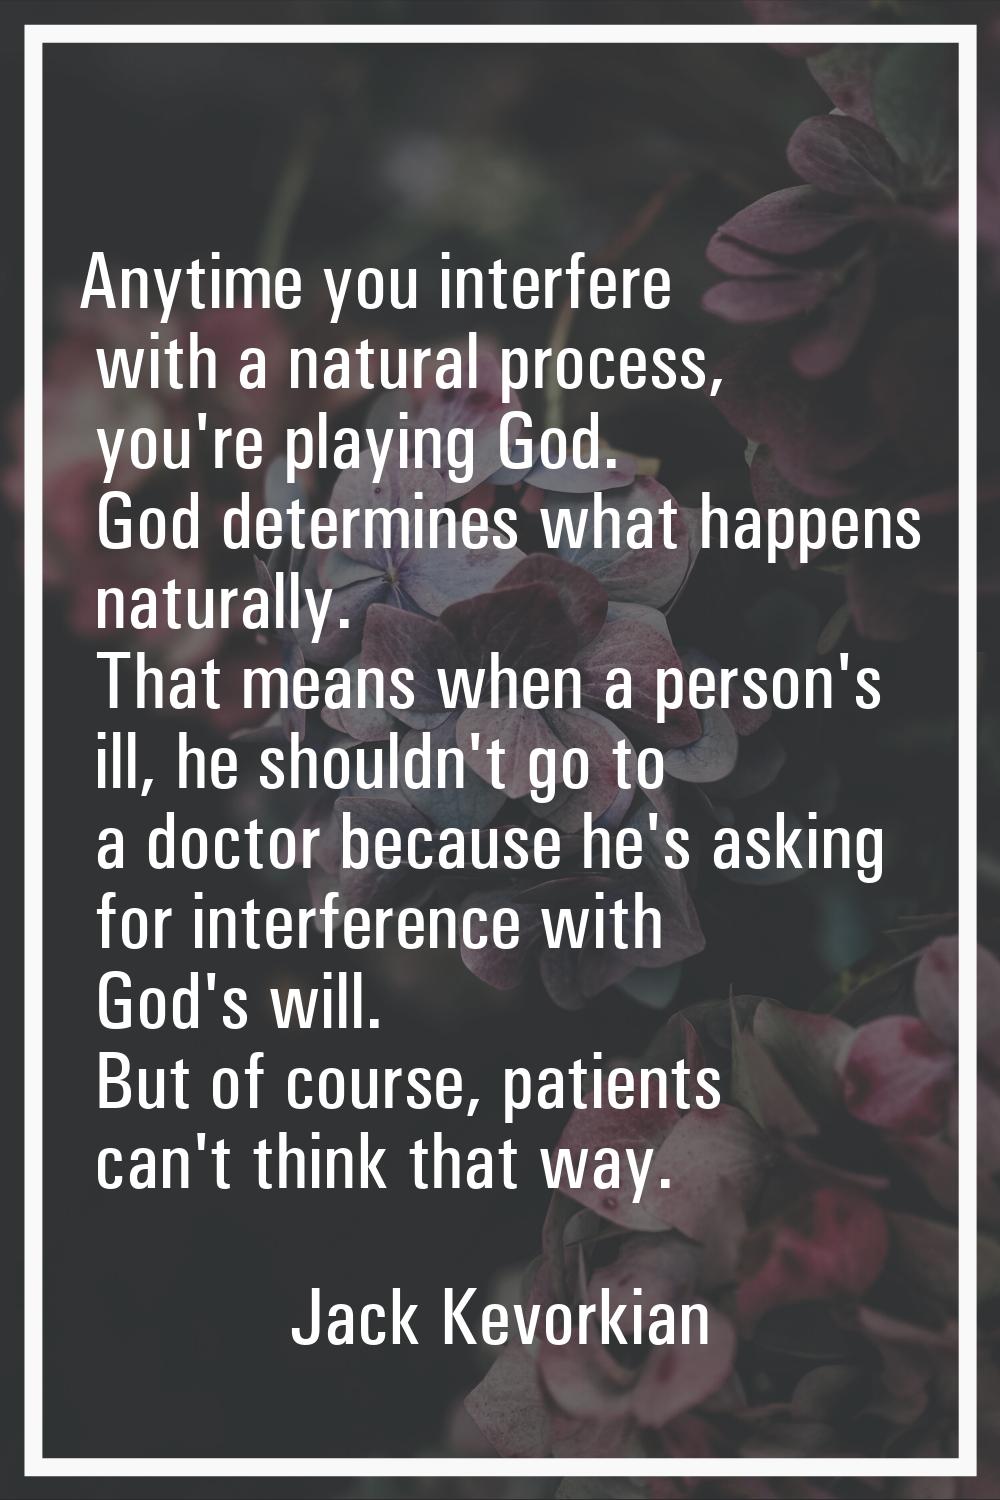 Anytime you interfere with a natural process, you're playing God. God determines what happens natur